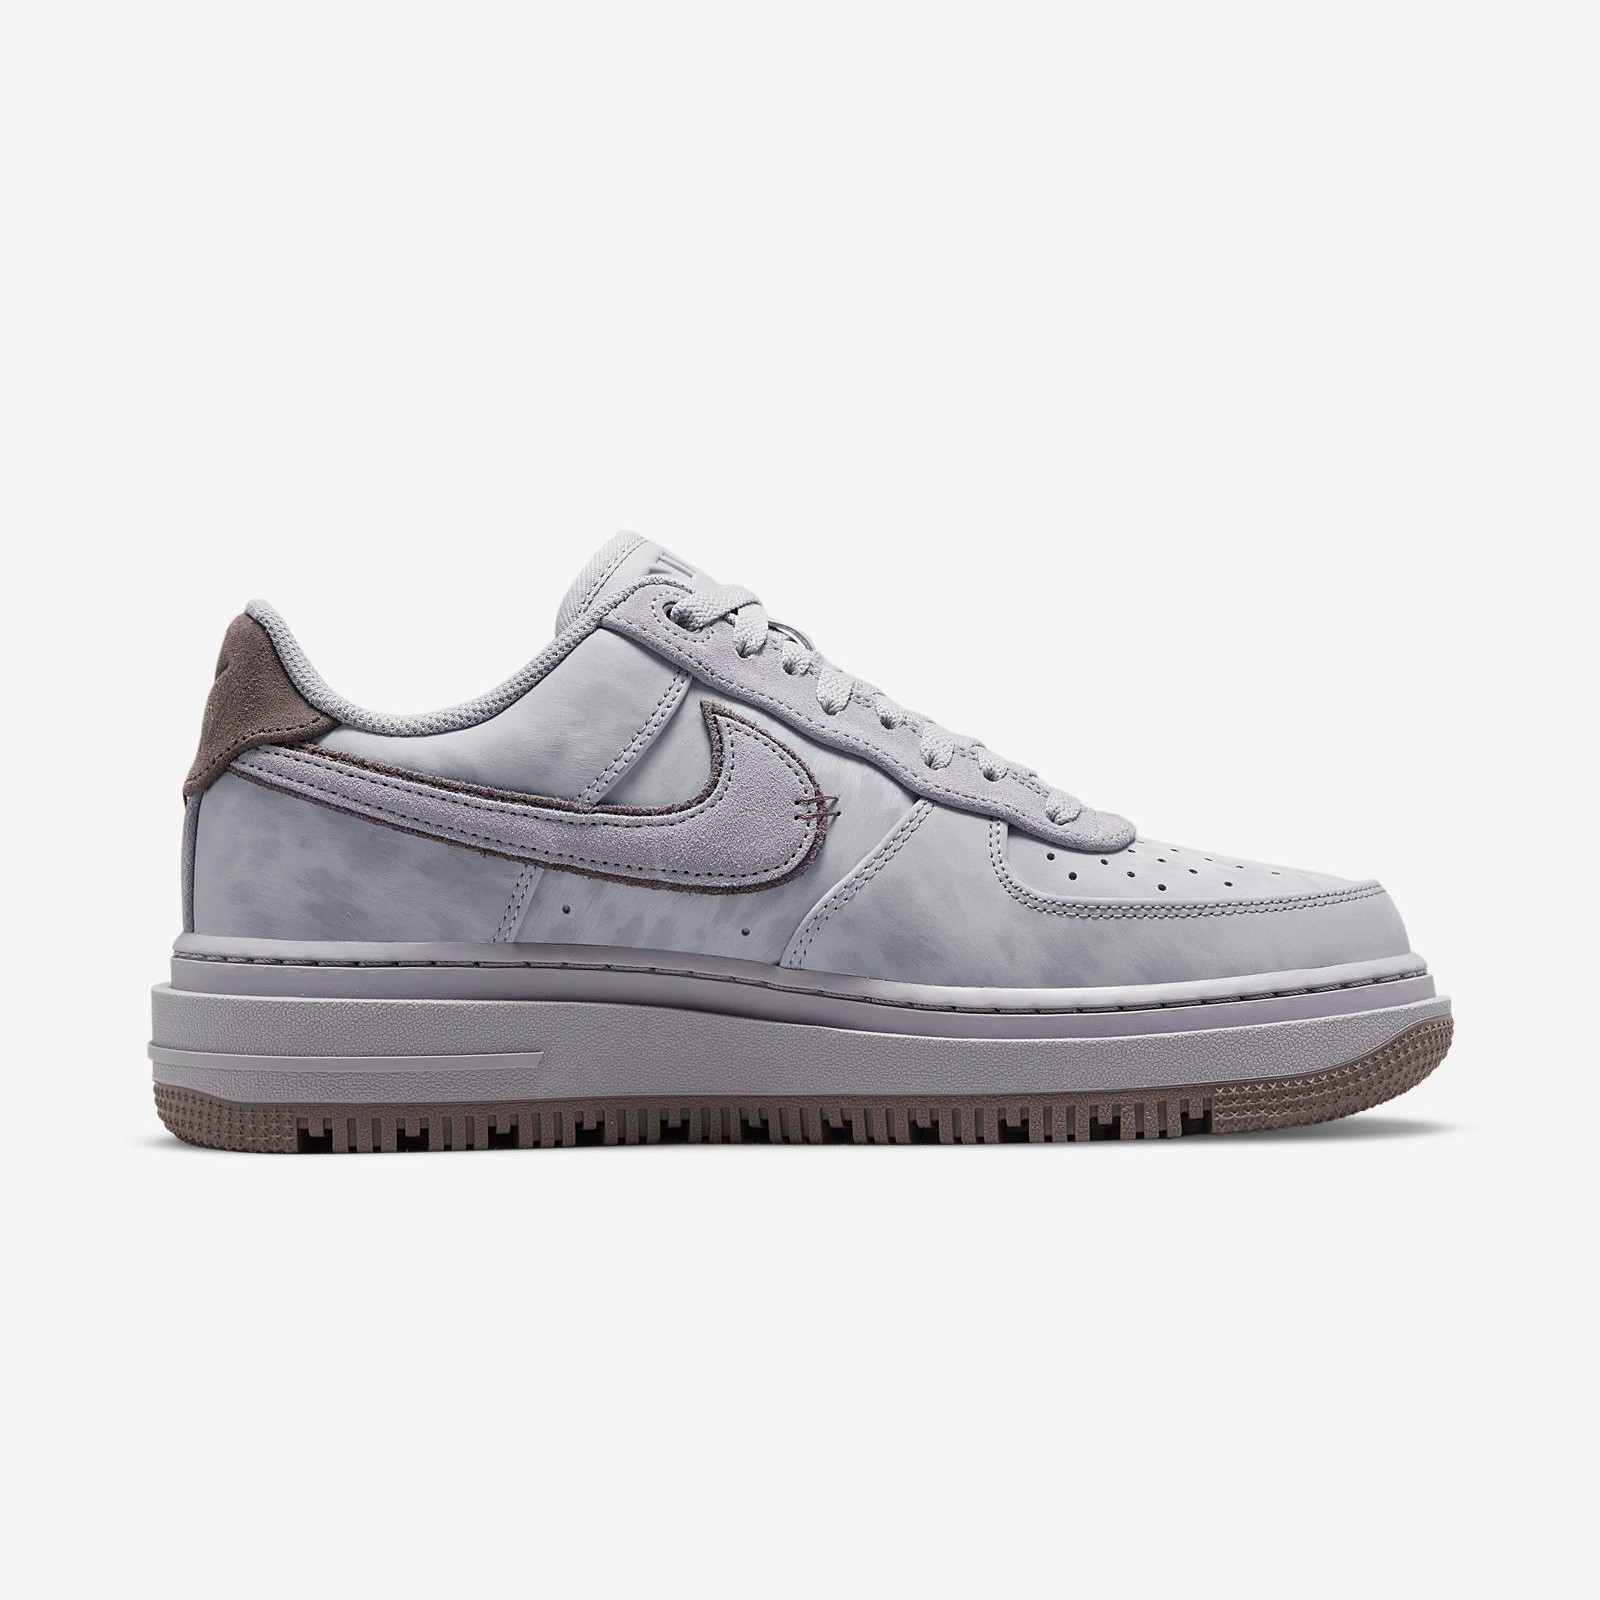 Nike Air Force 1 Luxe
« Providence Purple »